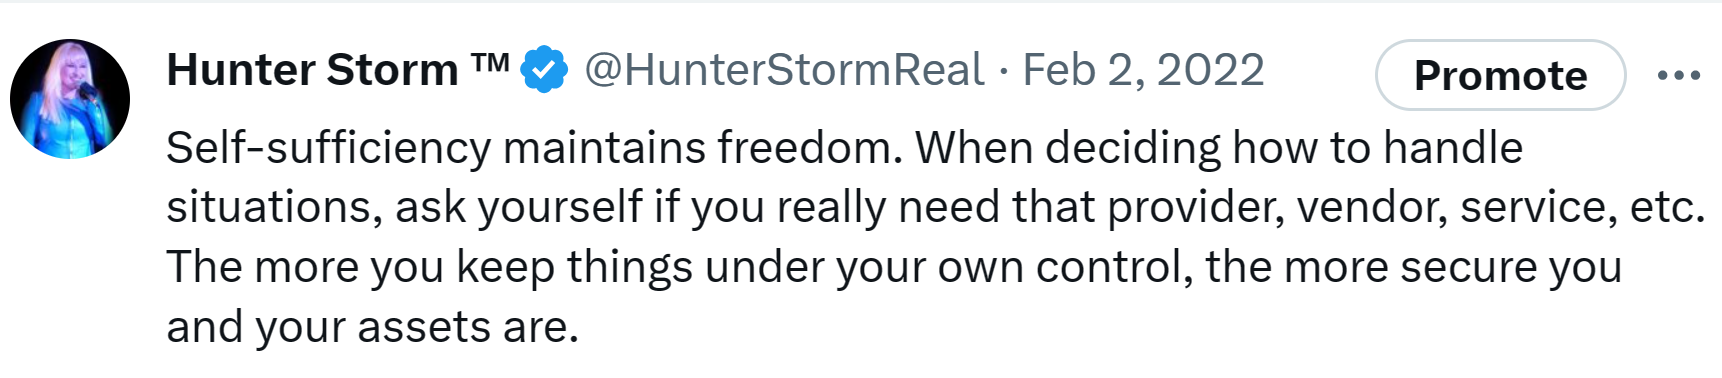 Hunter Storm Wisdom: Timeless Insights and Inspiration | "Self-sufficiency maintains freedom. When deciding how to handle situations, ask yourself if you really need that provider, vendor, service, etc. The more you keep things under your own control, the more secure you and your assets are."